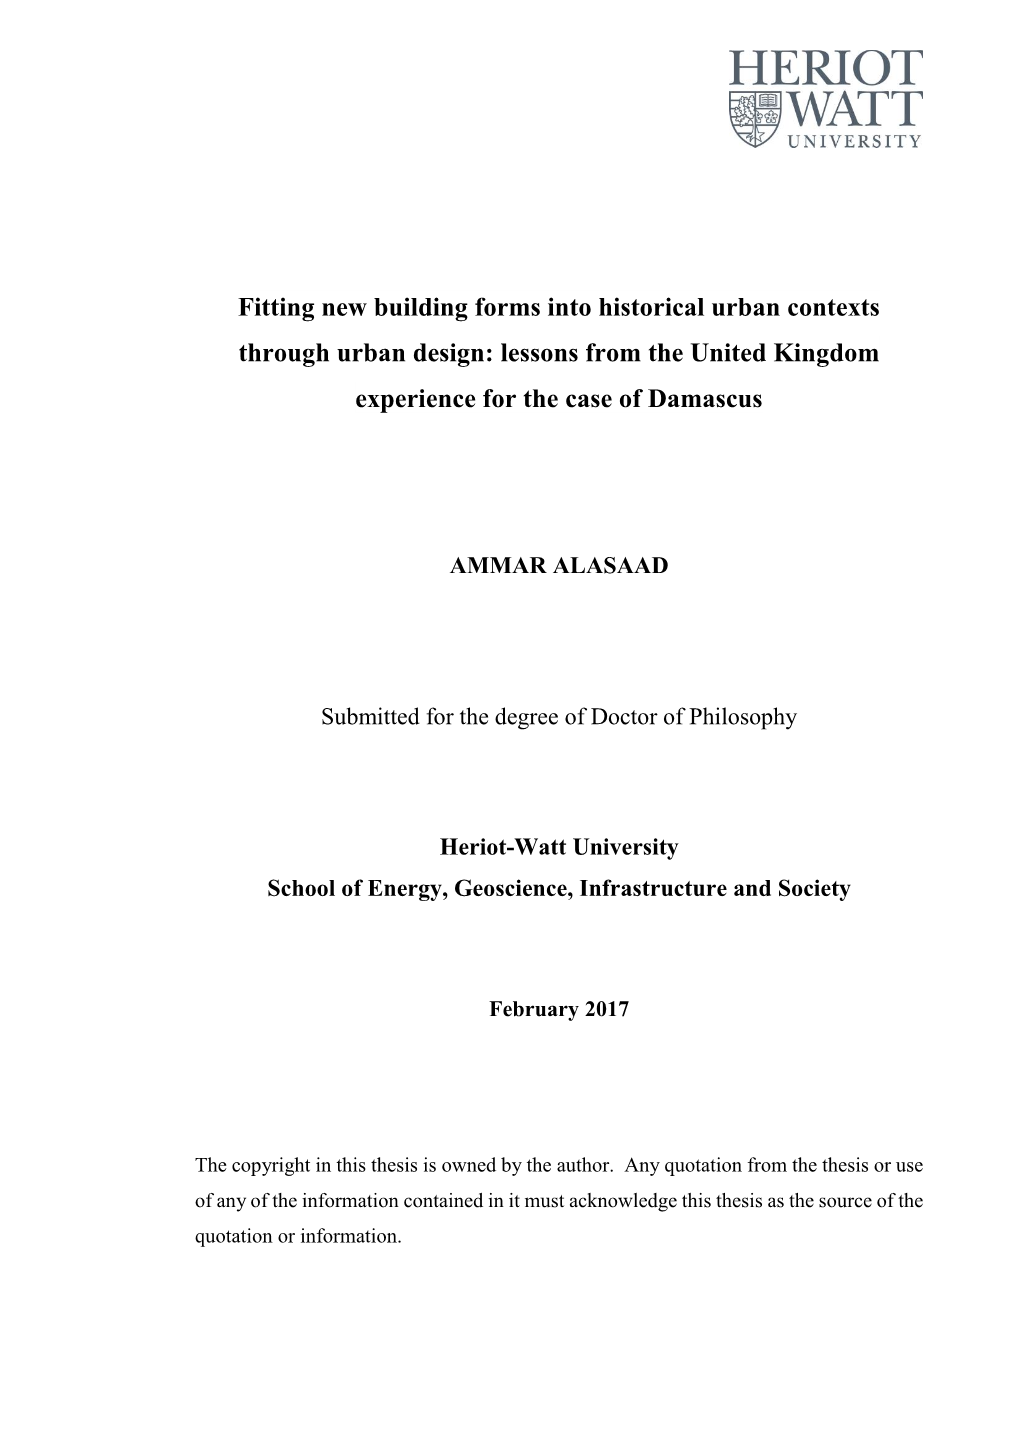 Fitting New Building Forms Into Historical Urban Contexts Through Urban Design: Lessons from the United Kingdom Experience for the Case of Damascus